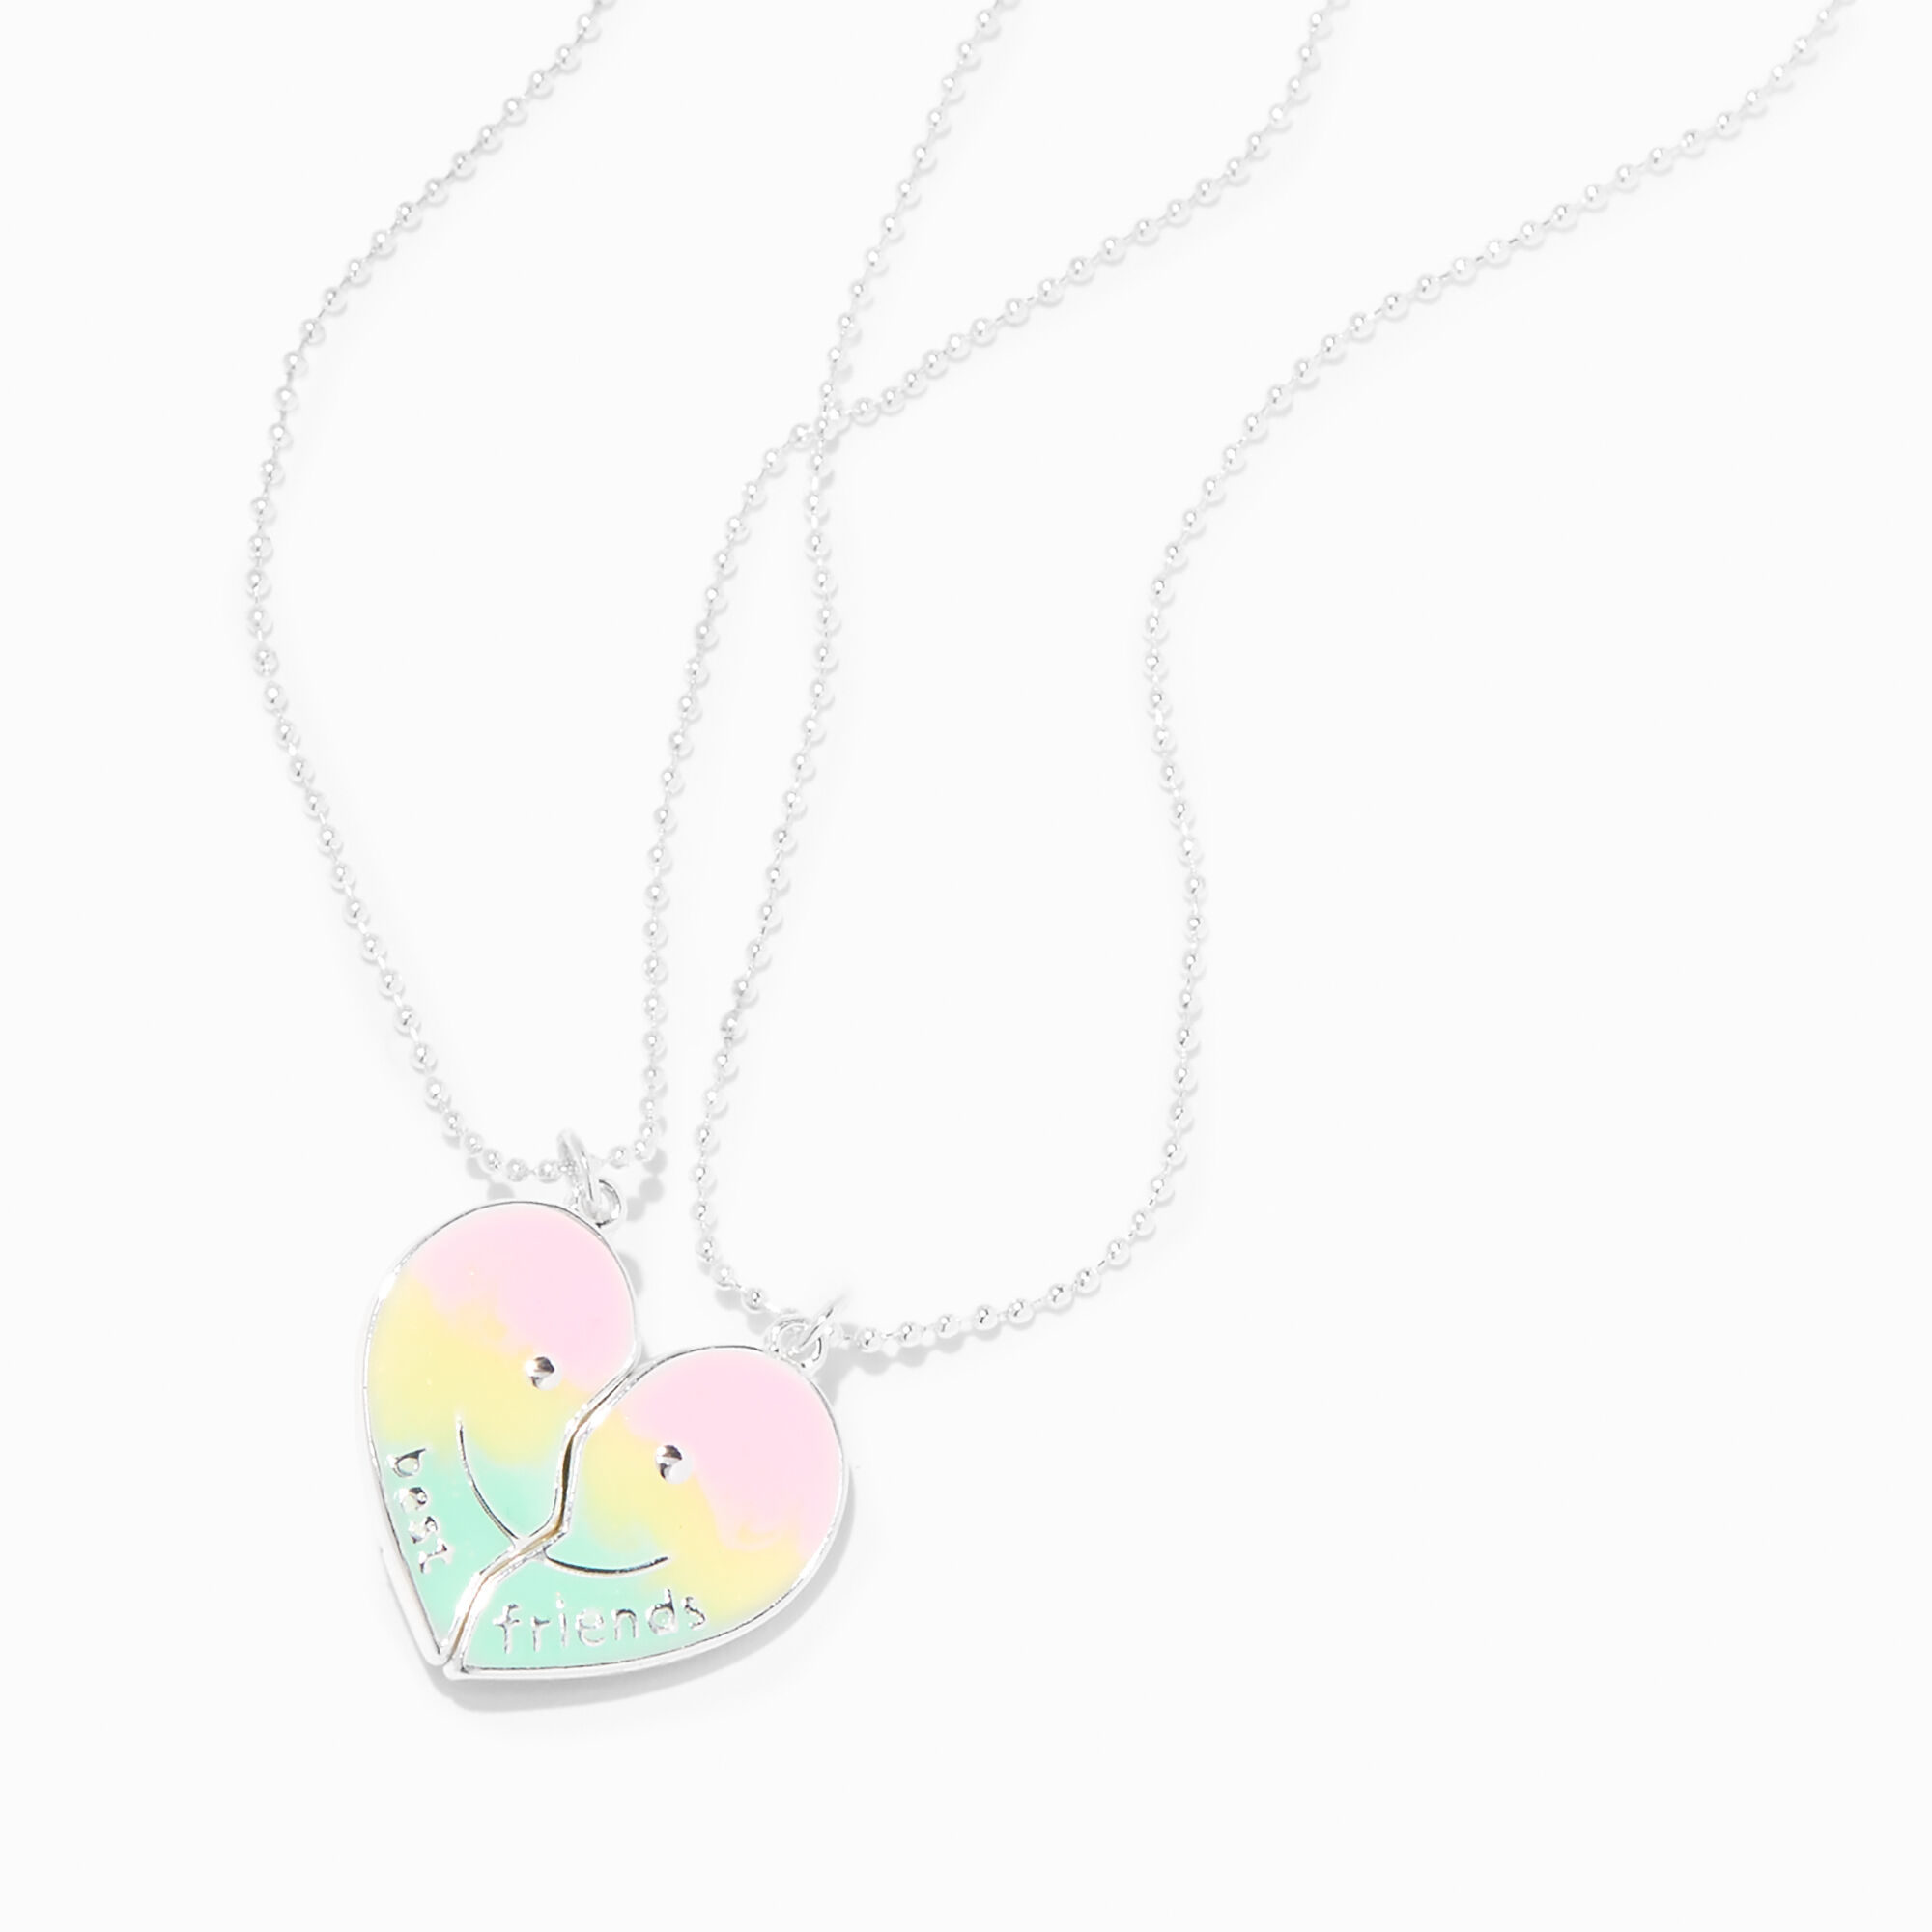 View Claires Best Friends Happy Face Glow In The Dark Ombré Split Heart Pendant Necklaces 2 Pack Silver information